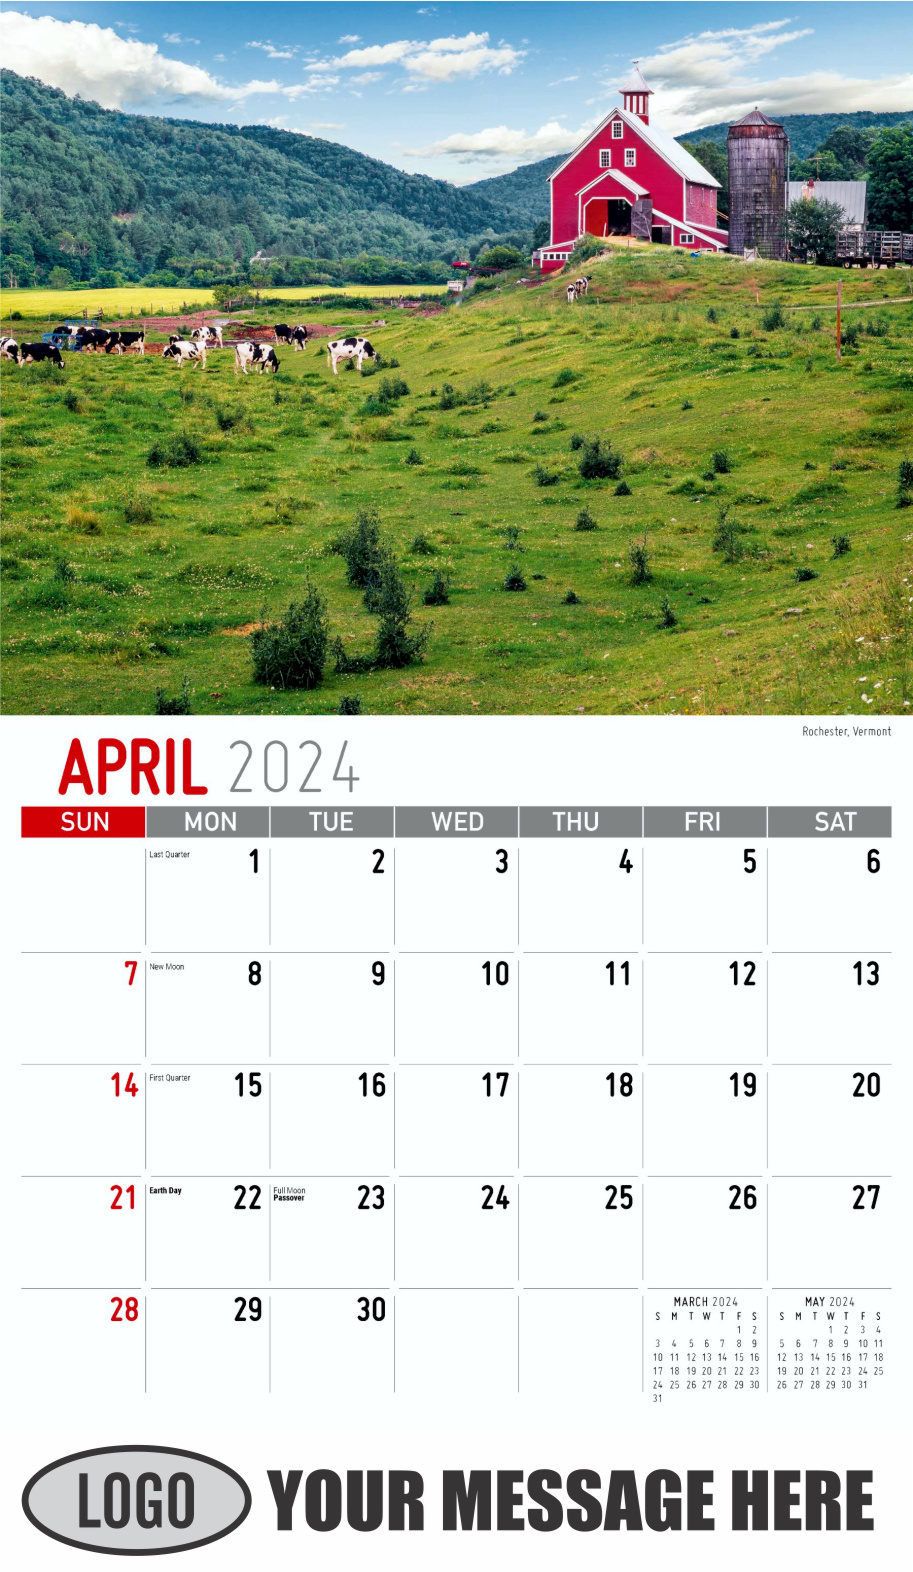 Scenes of New England 2024 Business Advertising Wall Calendar - April